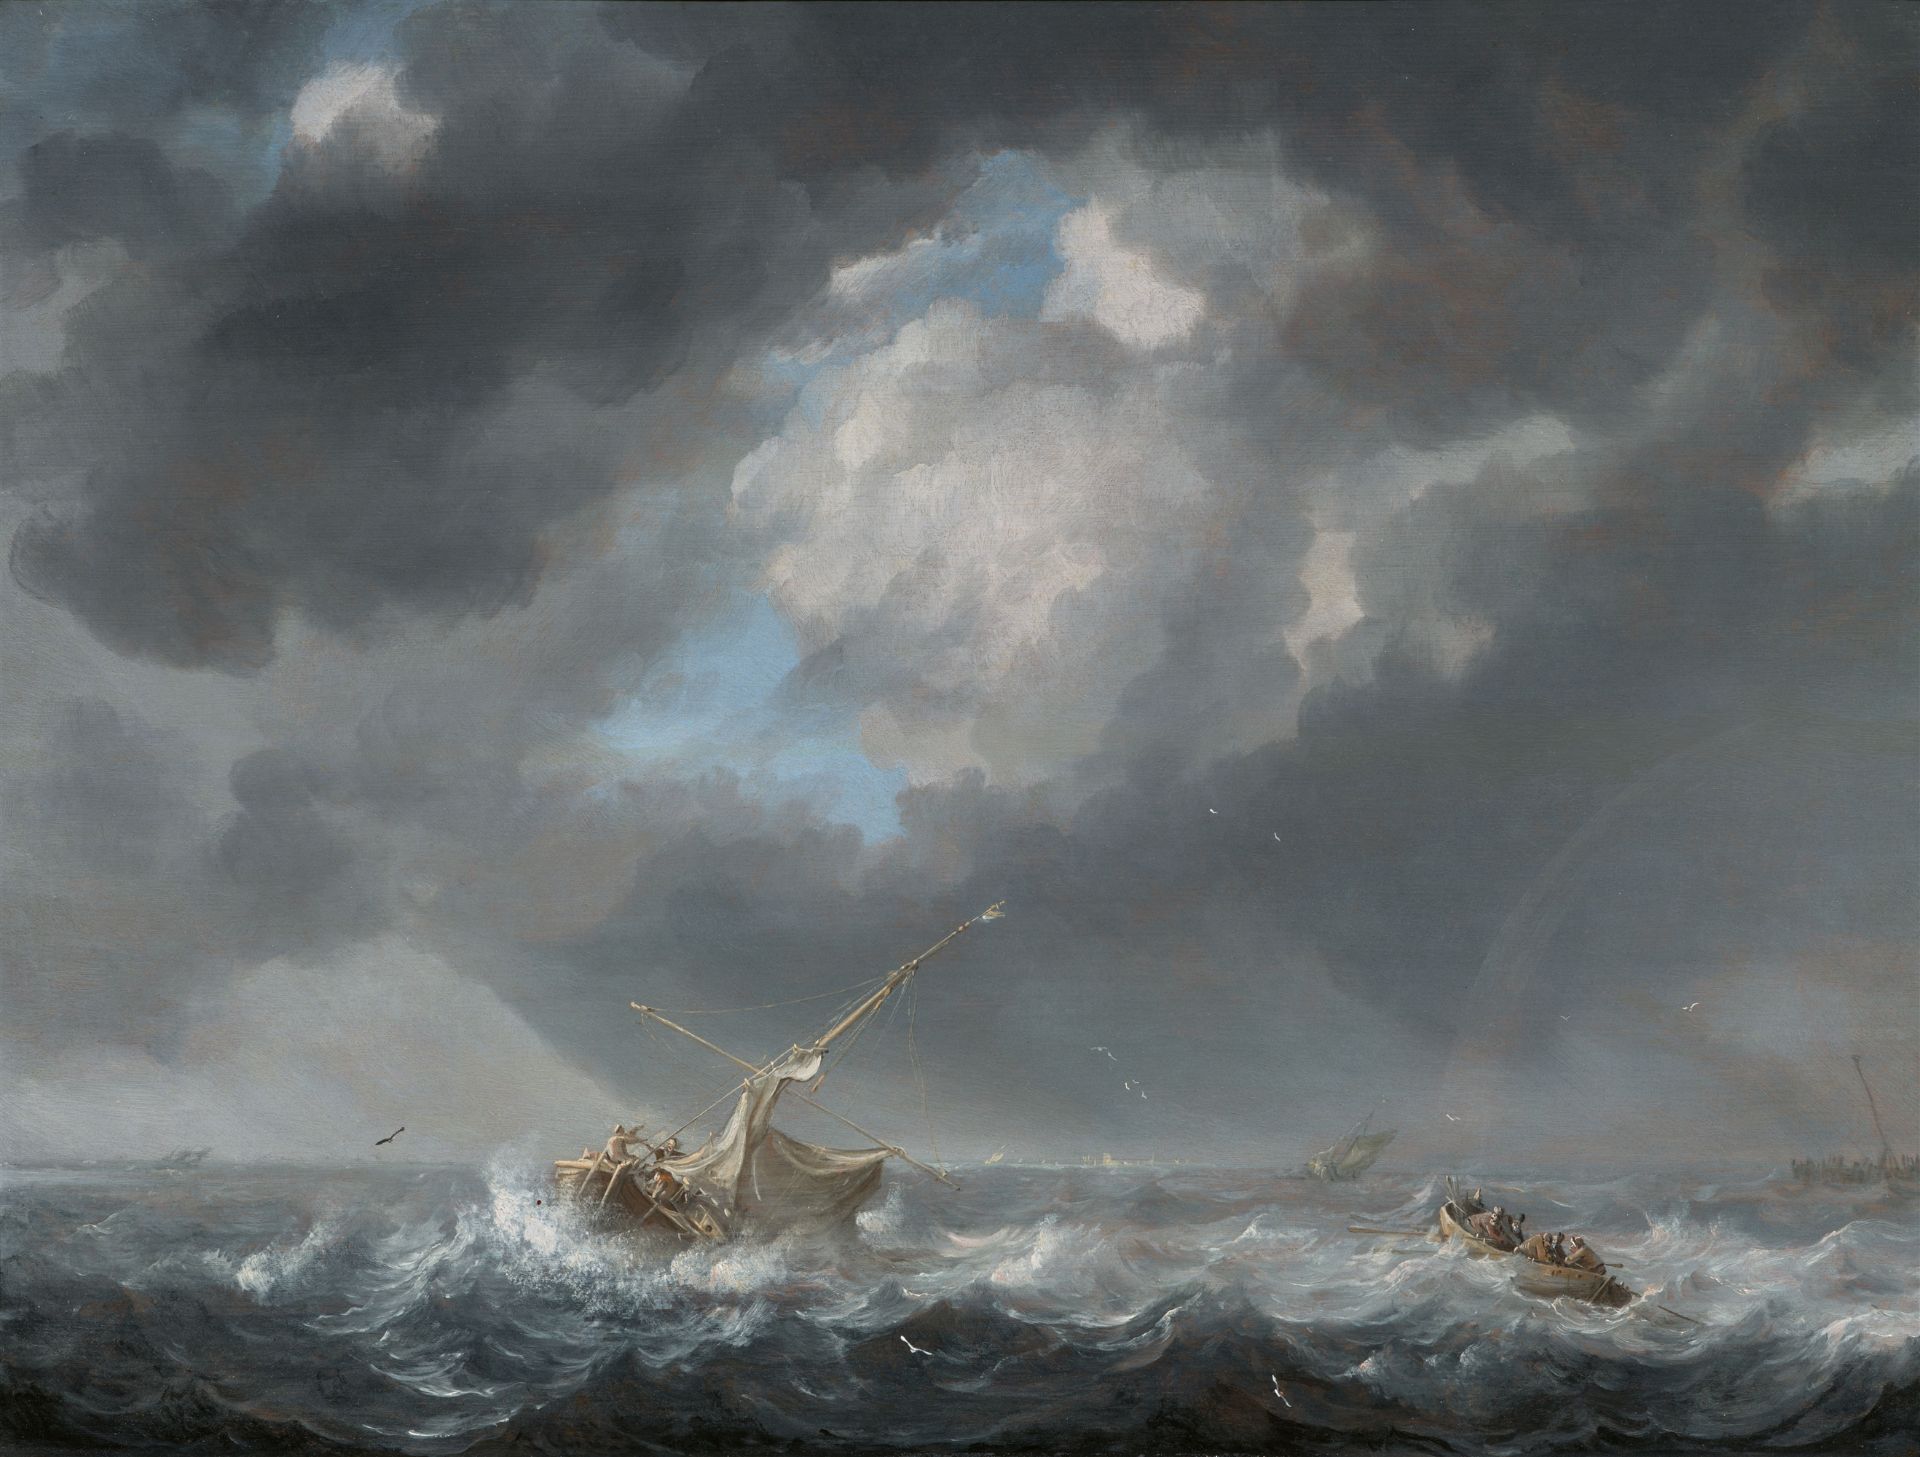 Julius Porcellis, A Sailing Boat, a Rowing Boat and other Ships on Rough Seas by a Pier